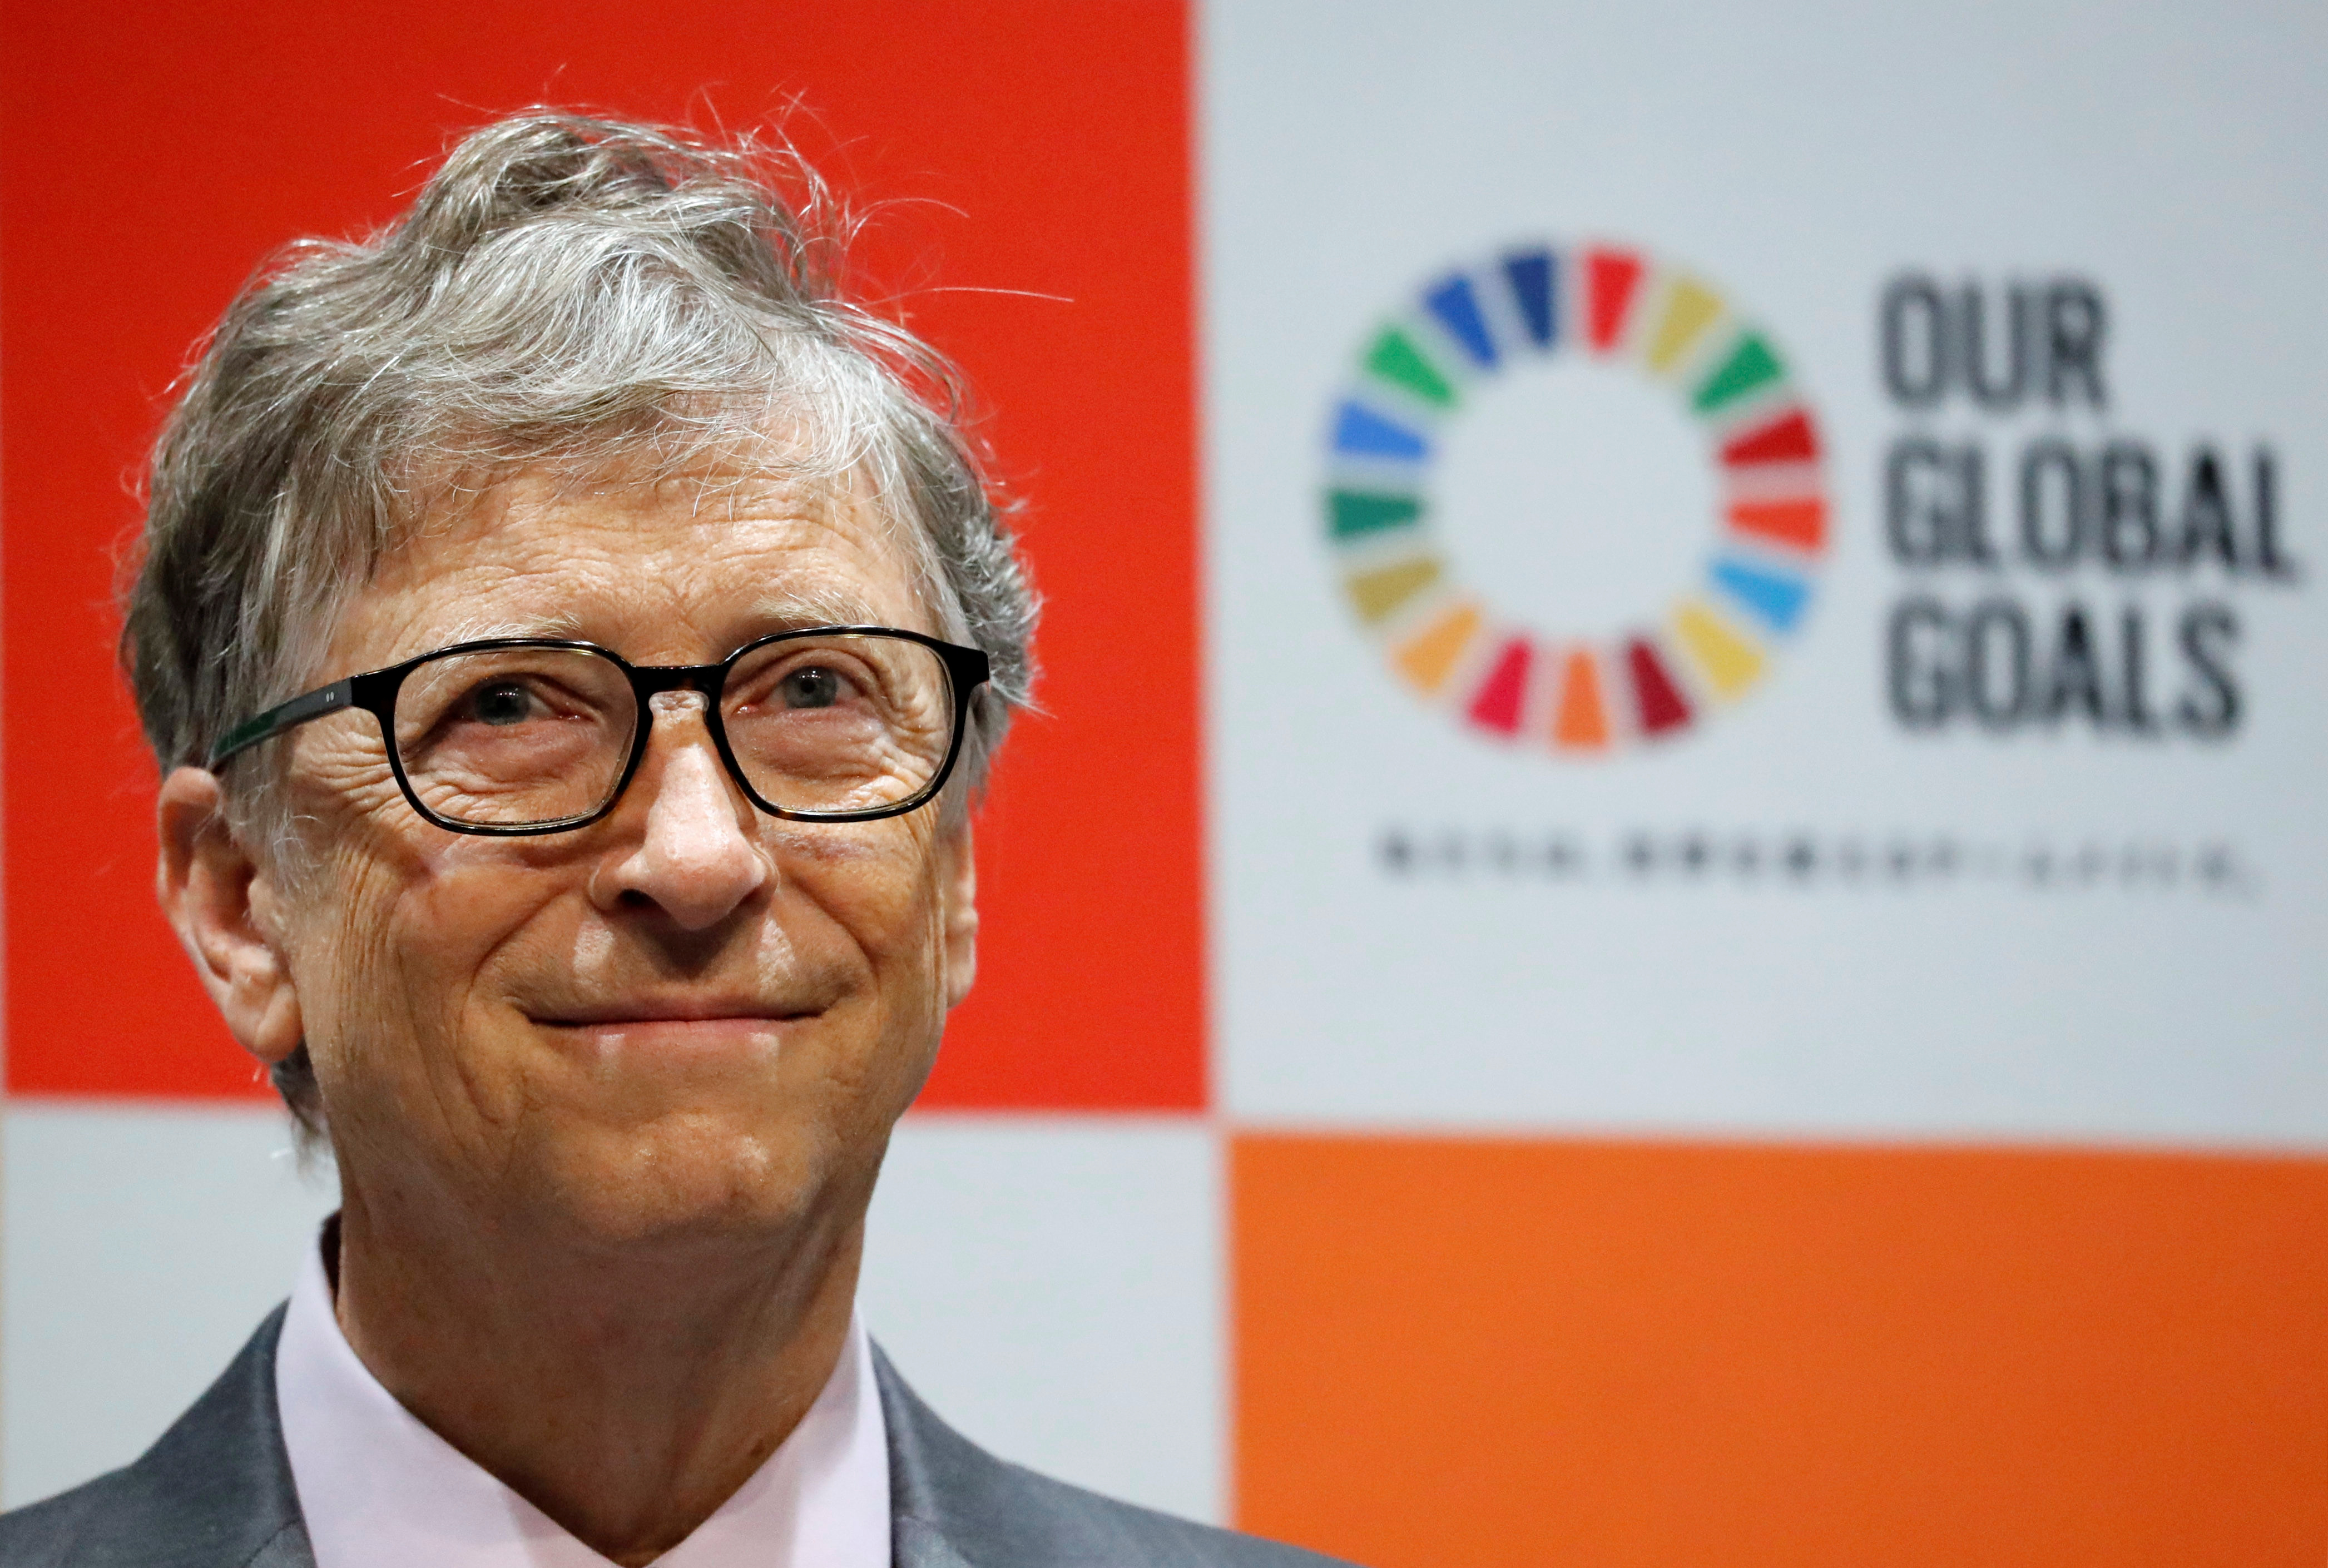 Bill Gates, co-chair of the Bill & Melinda Gates Foundation, attends a news conference as the foundation teams up with the Japan Sports Agency and Tokyo 2020 to promote the Sustainable Development Goals in conjunction with the Olympics, in Tokyo